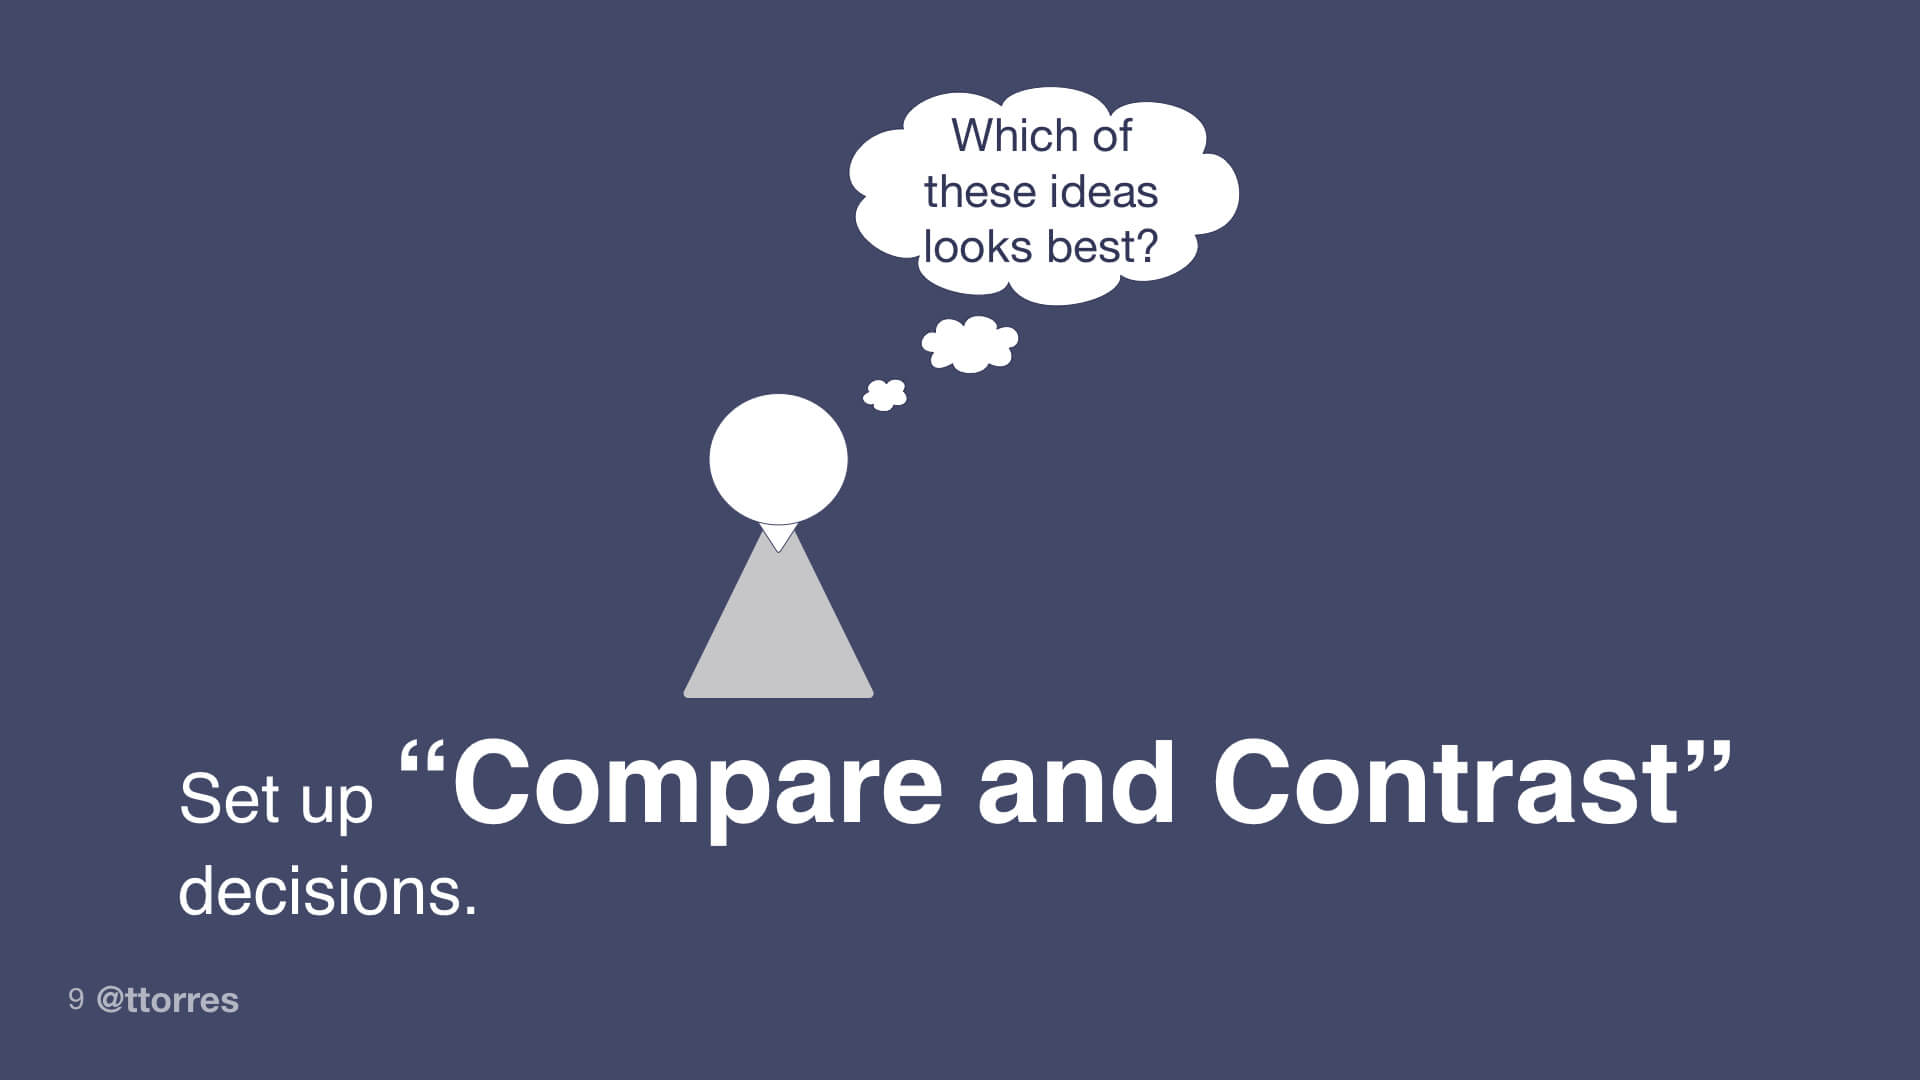 Which Best Compares And Contrasts Management And Marketing?: Key Differences Unveiled